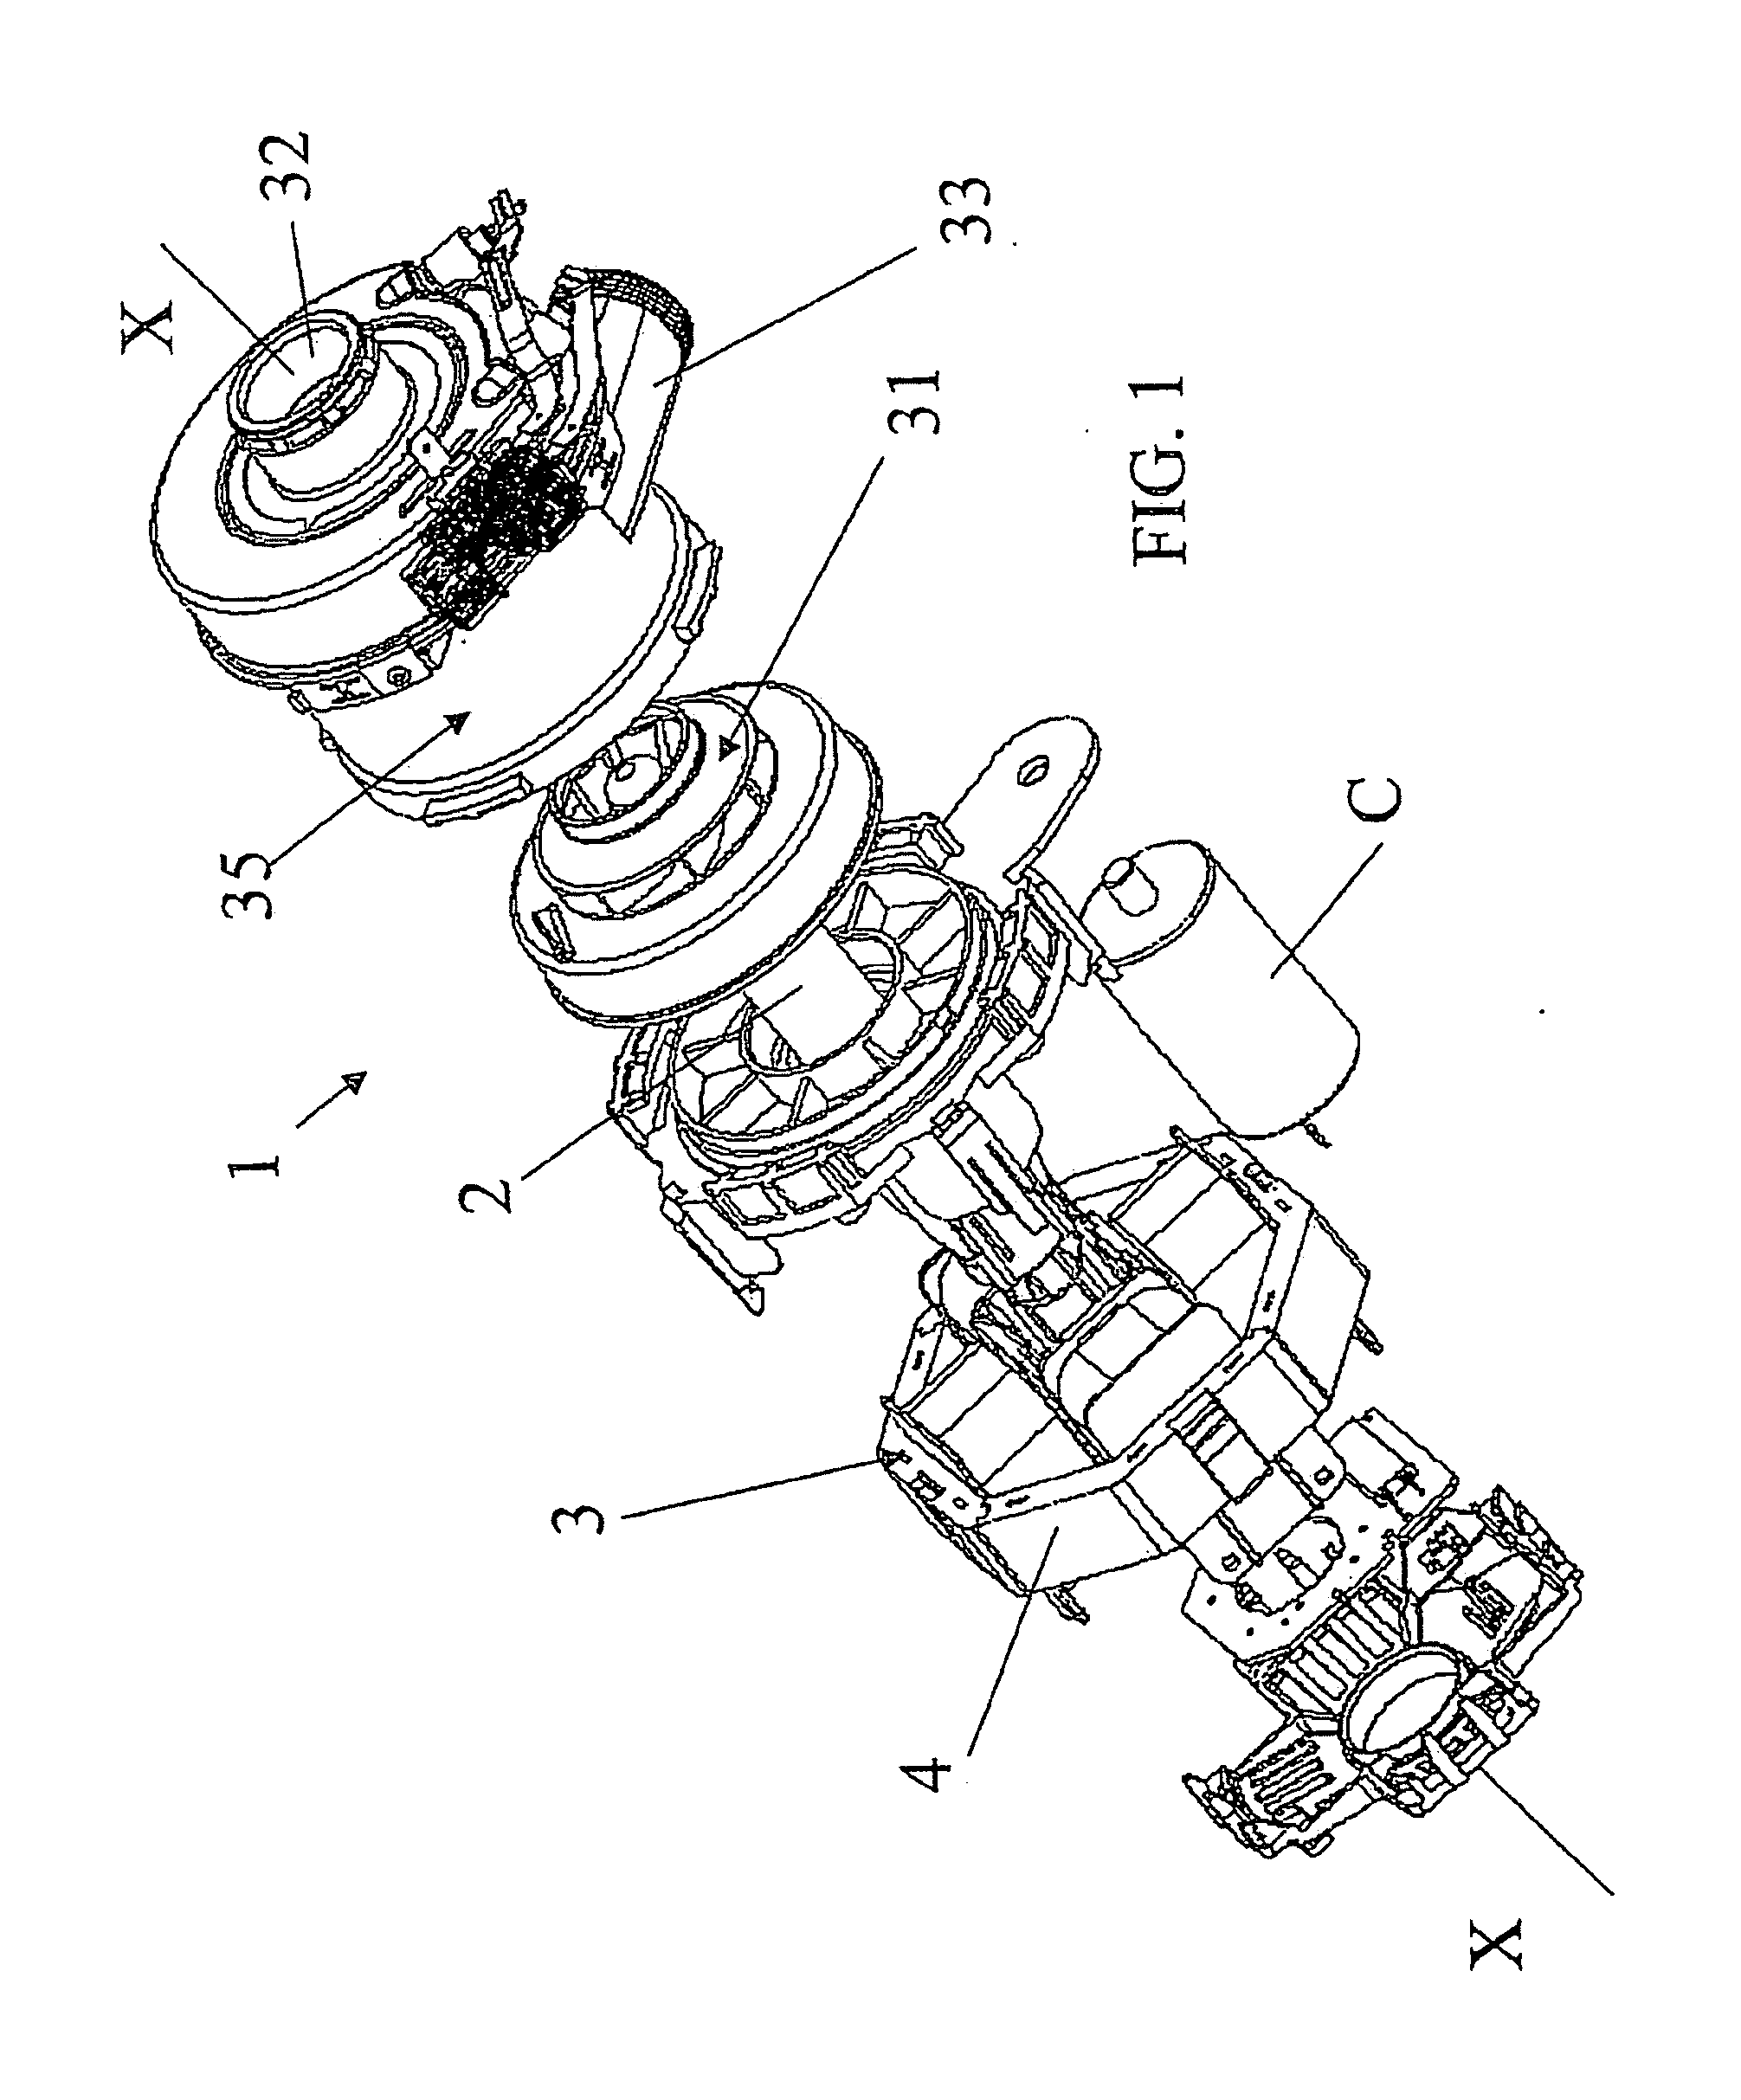 Two-phase synchronous electric motor with permanent magnets for mechanical priming washing pumps of dishwashers and similar washing machines